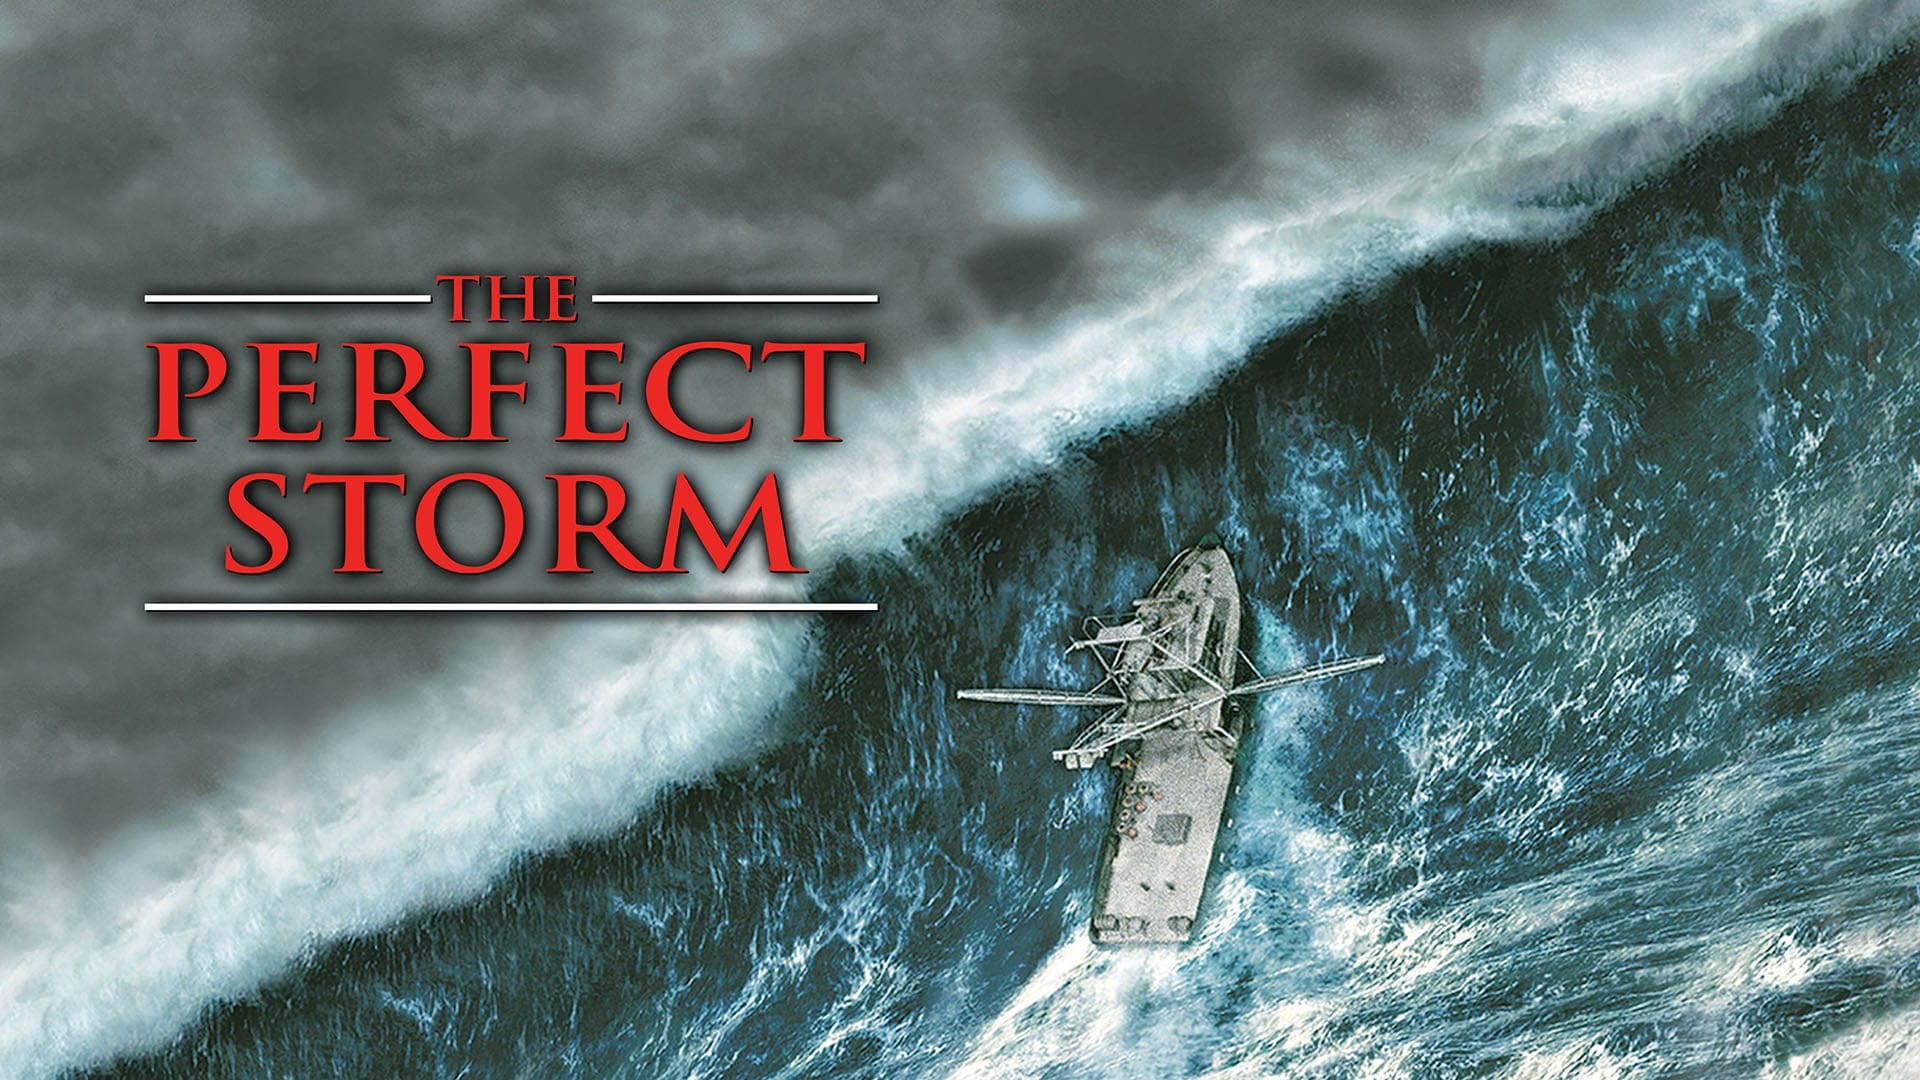 Watch The Perfect Storm Online | Stream Full Movies